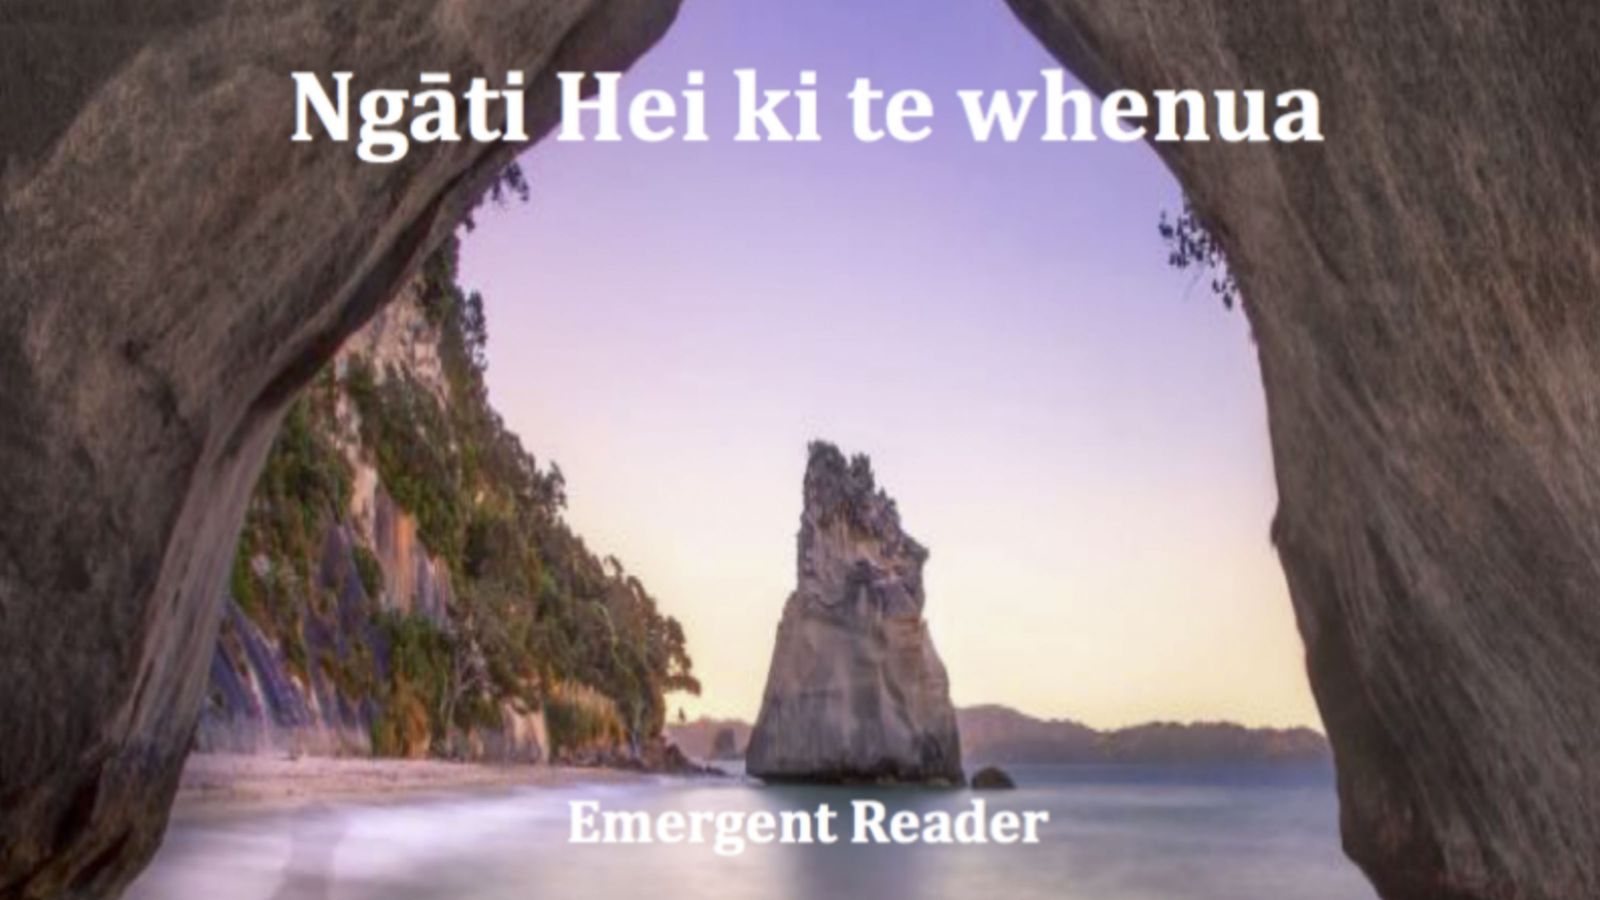 An image taken through a rocky arch on the shoreline of the ocean, looking out at a tall rock beside a sttep hill, under a purple sky, with text that reads, Ngāti Hei ki te whenua, Emergent Reader.